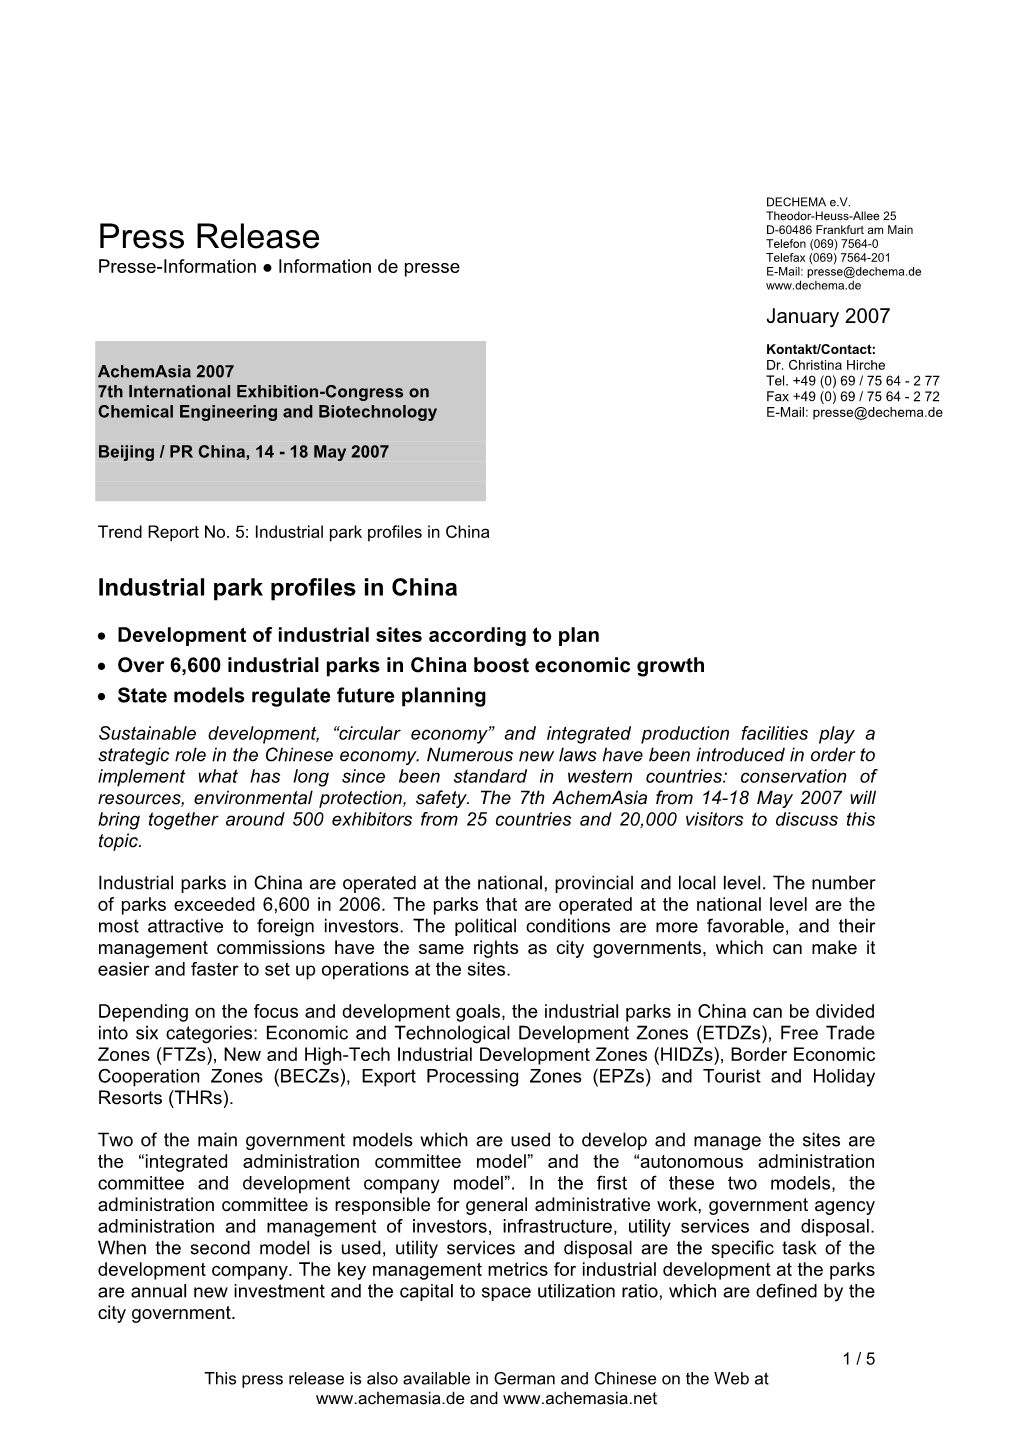 Industrial Park Profiles in China